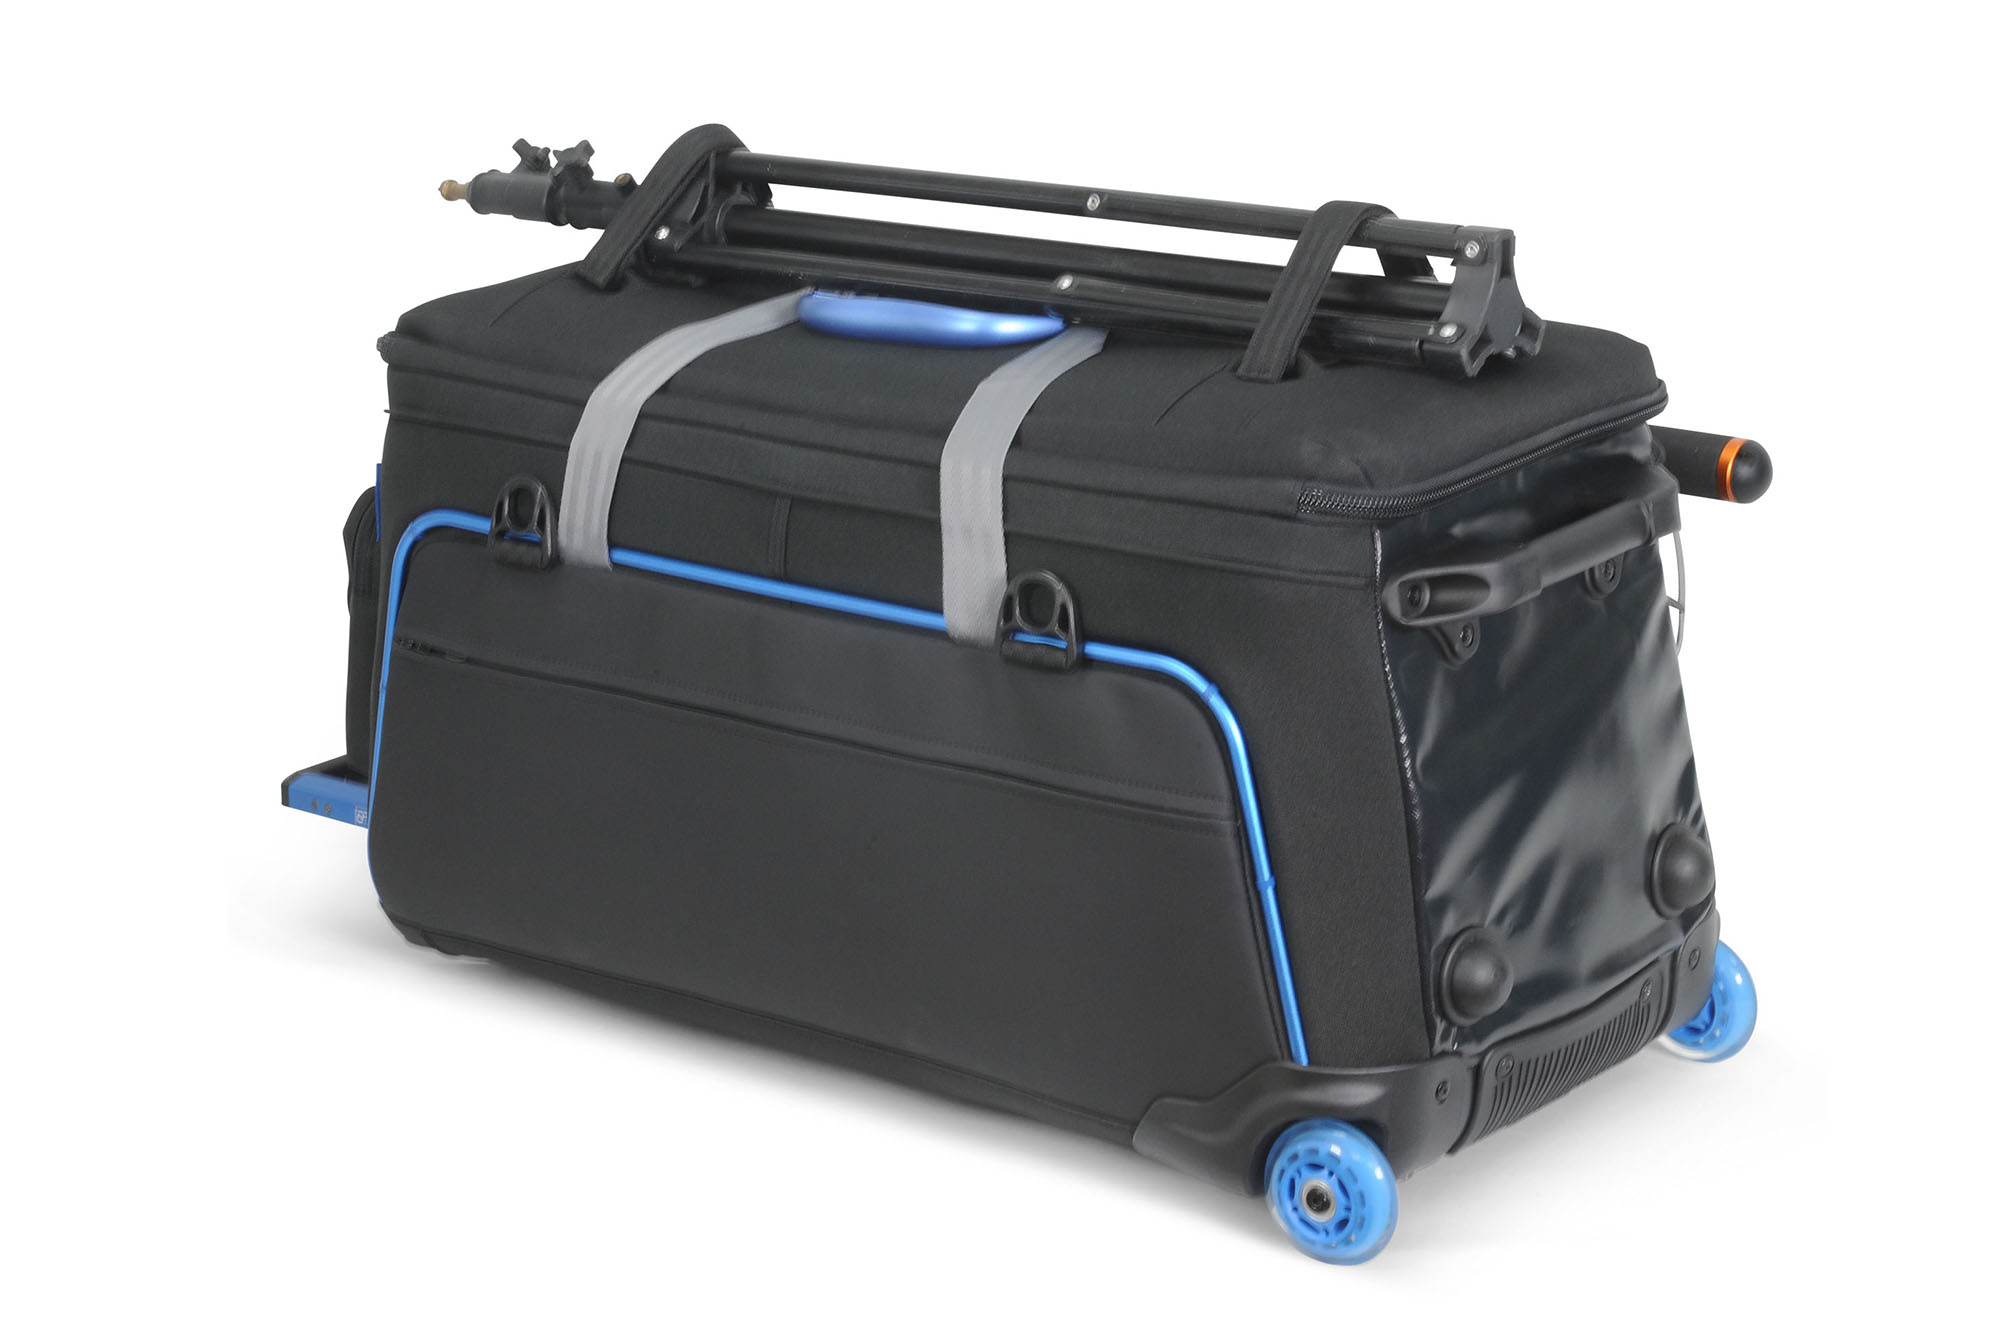 Orca OR-14 Shoulder Bag with Built in Trolley